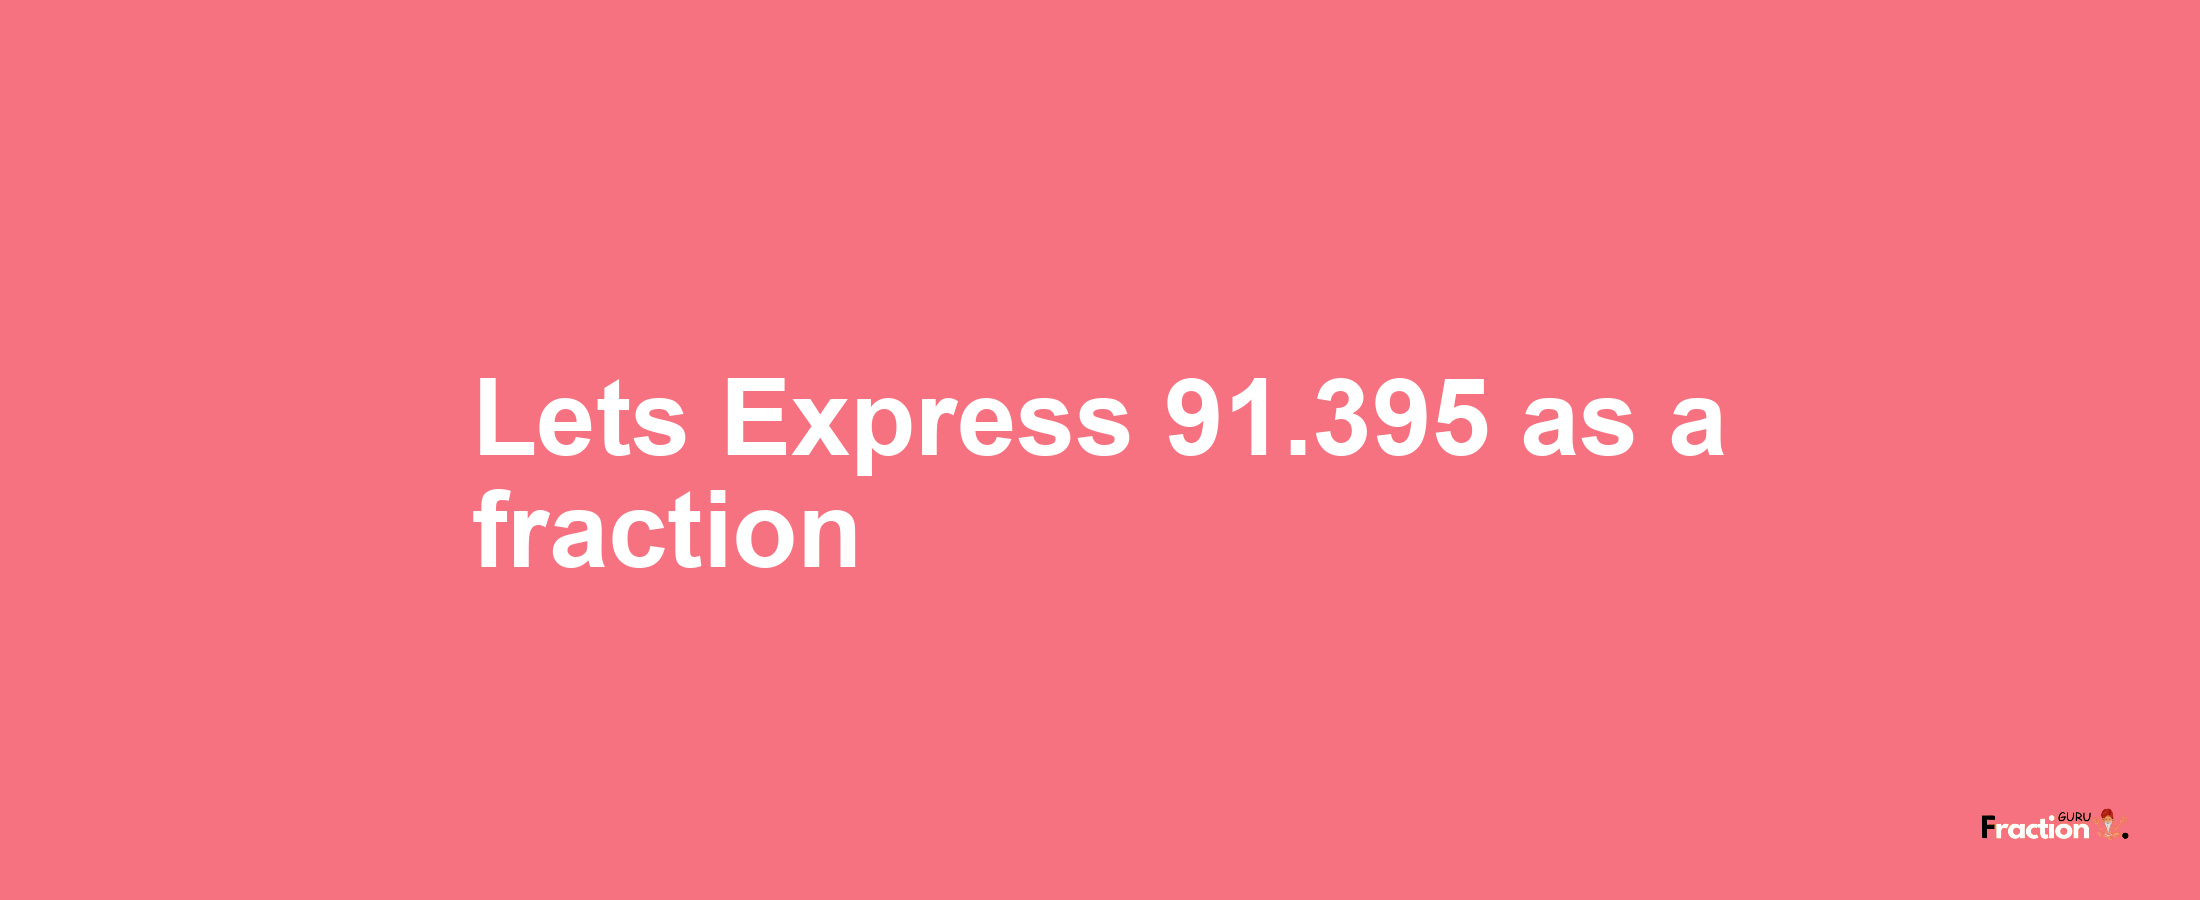 Lets Express 91.395 as afraction